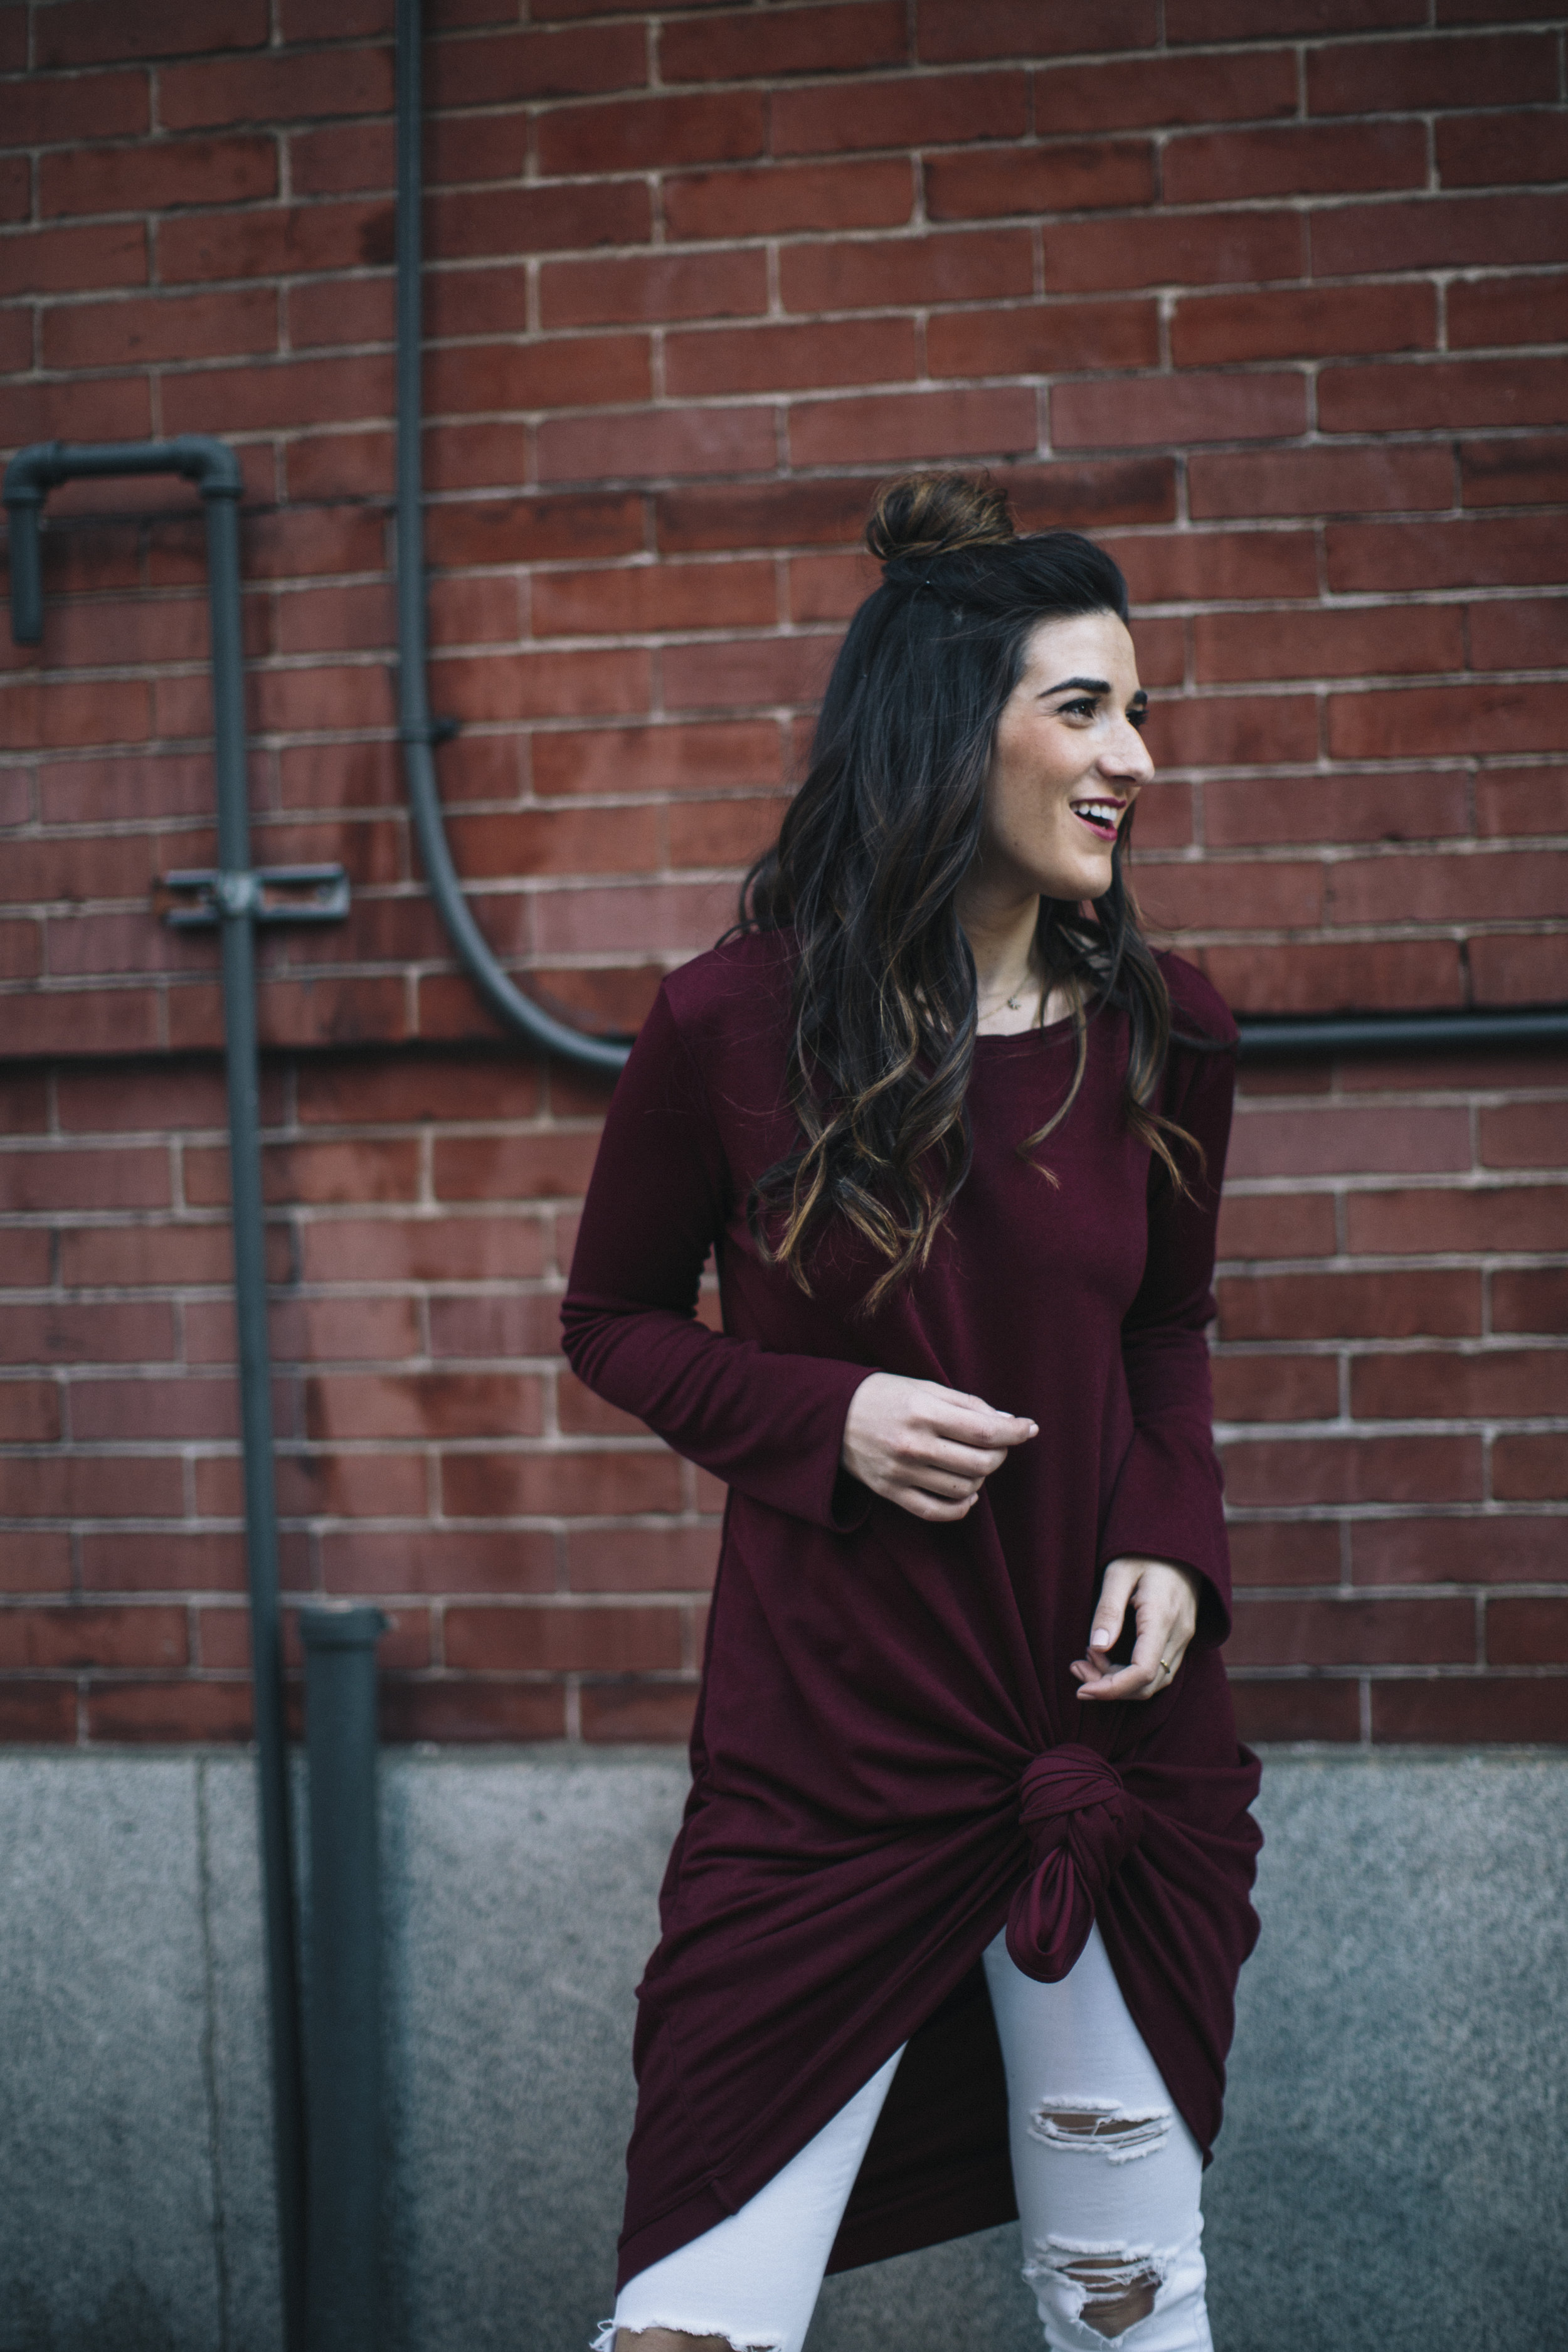 Knotted Dress + Ripped White Jeans 4 Ways To Build Connections Louboutins & Love Fashion Blog Esther Santer NYC Street Style Blogger Outfit OOTD Trendy Red Maroon Burgundy Winter Color Leopard Coach Shoes Booties Pants Girl Women Bun Topknot Hair Wear.jpg